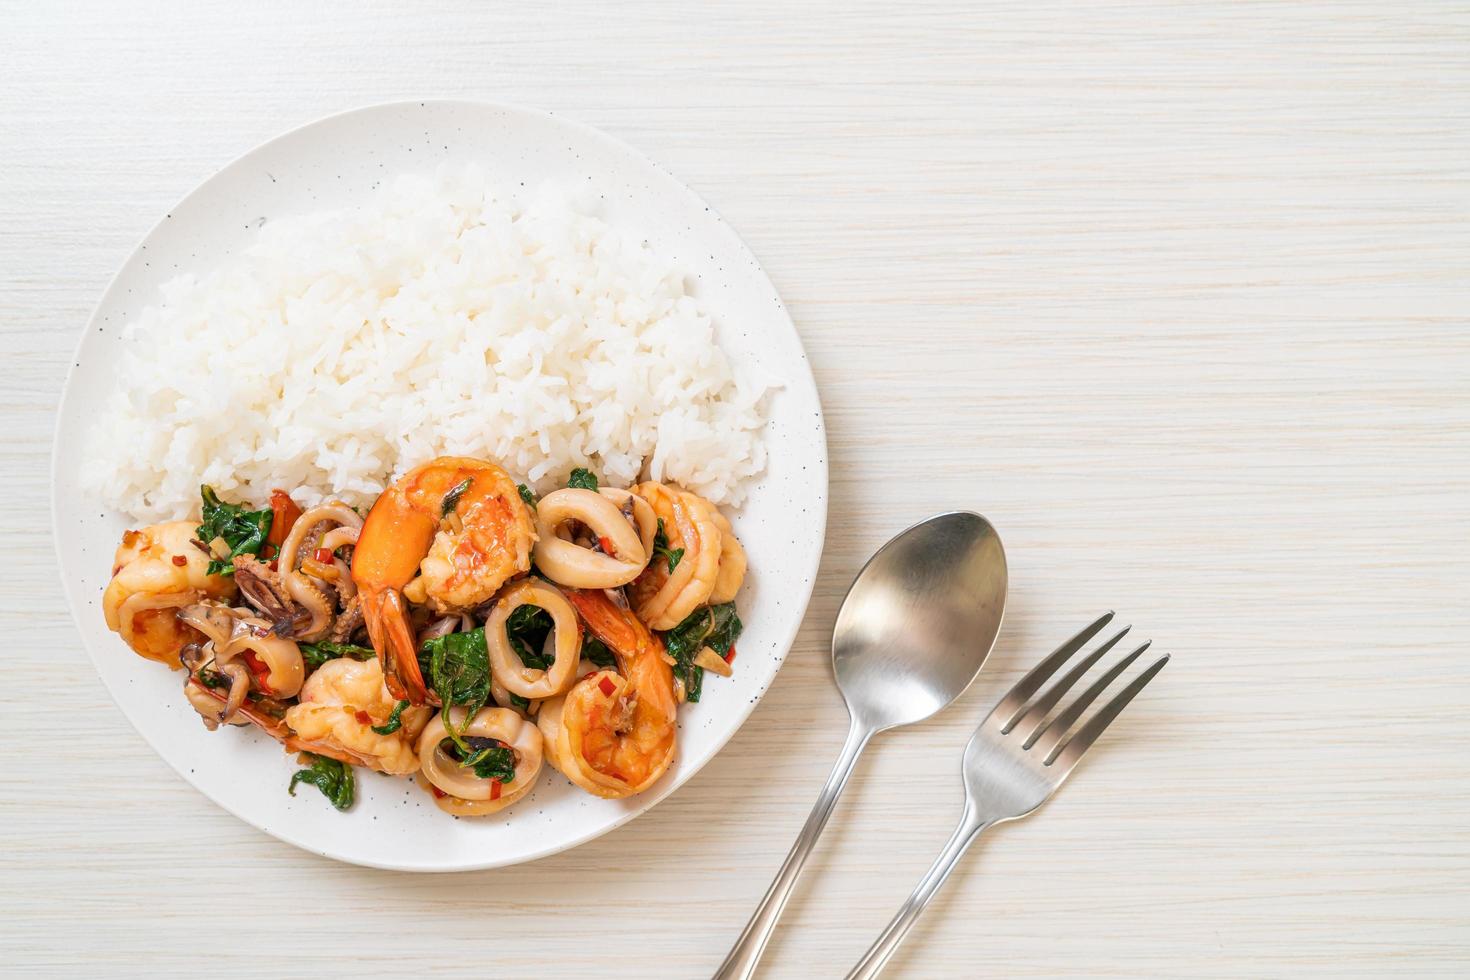 Rice and stir-fried seafood of shrimp and squid with Thai basil - Asian food style photo